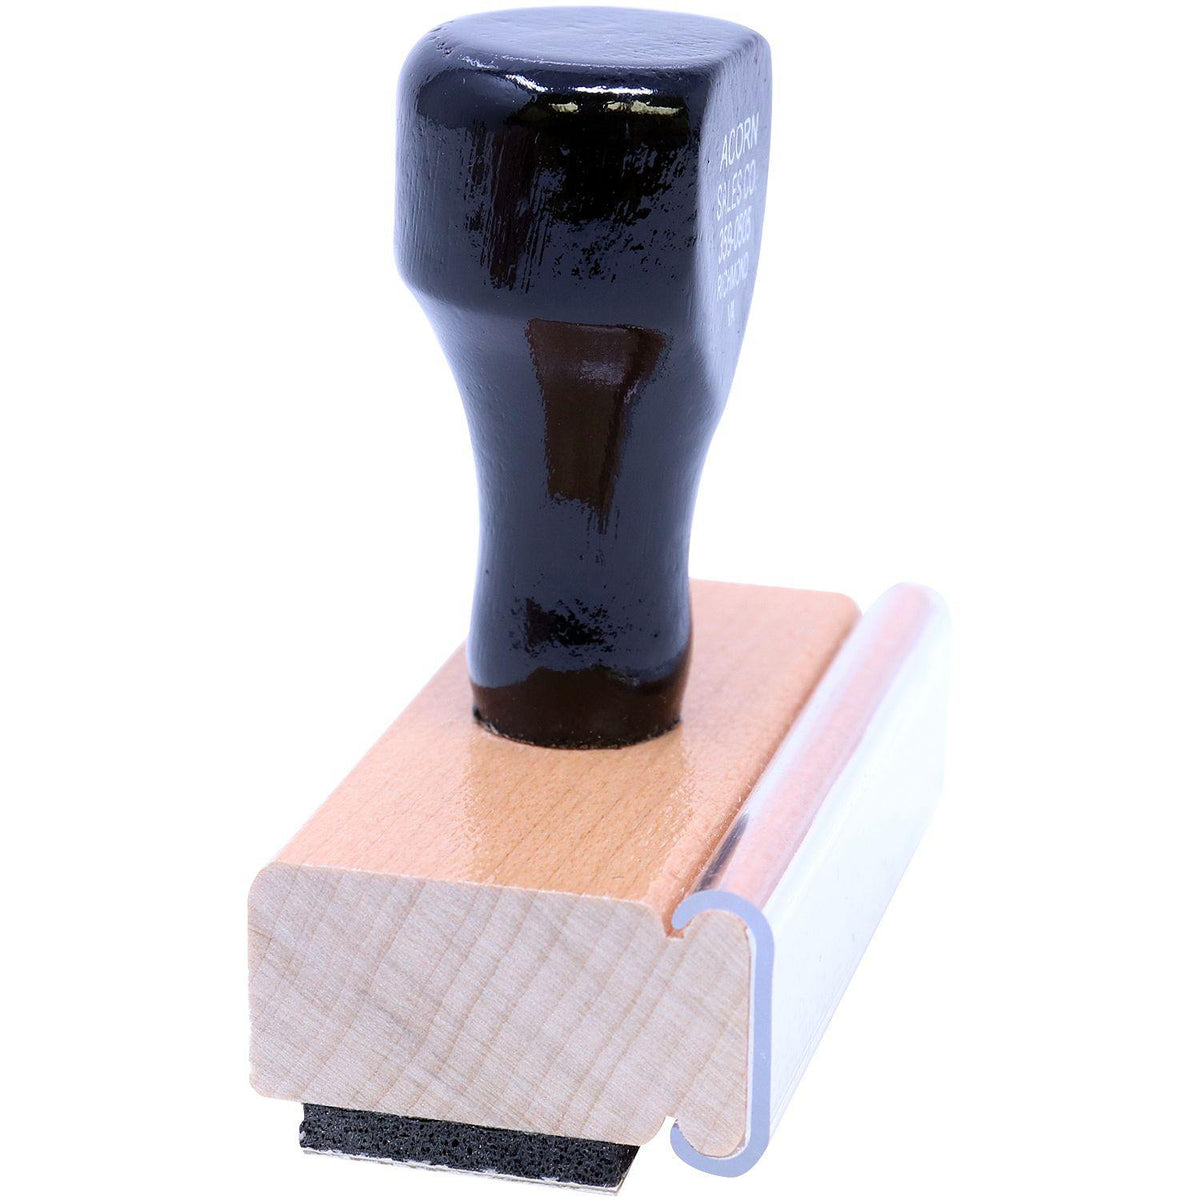 Side View of Full Amount Due Rubber Stamp at an Angle